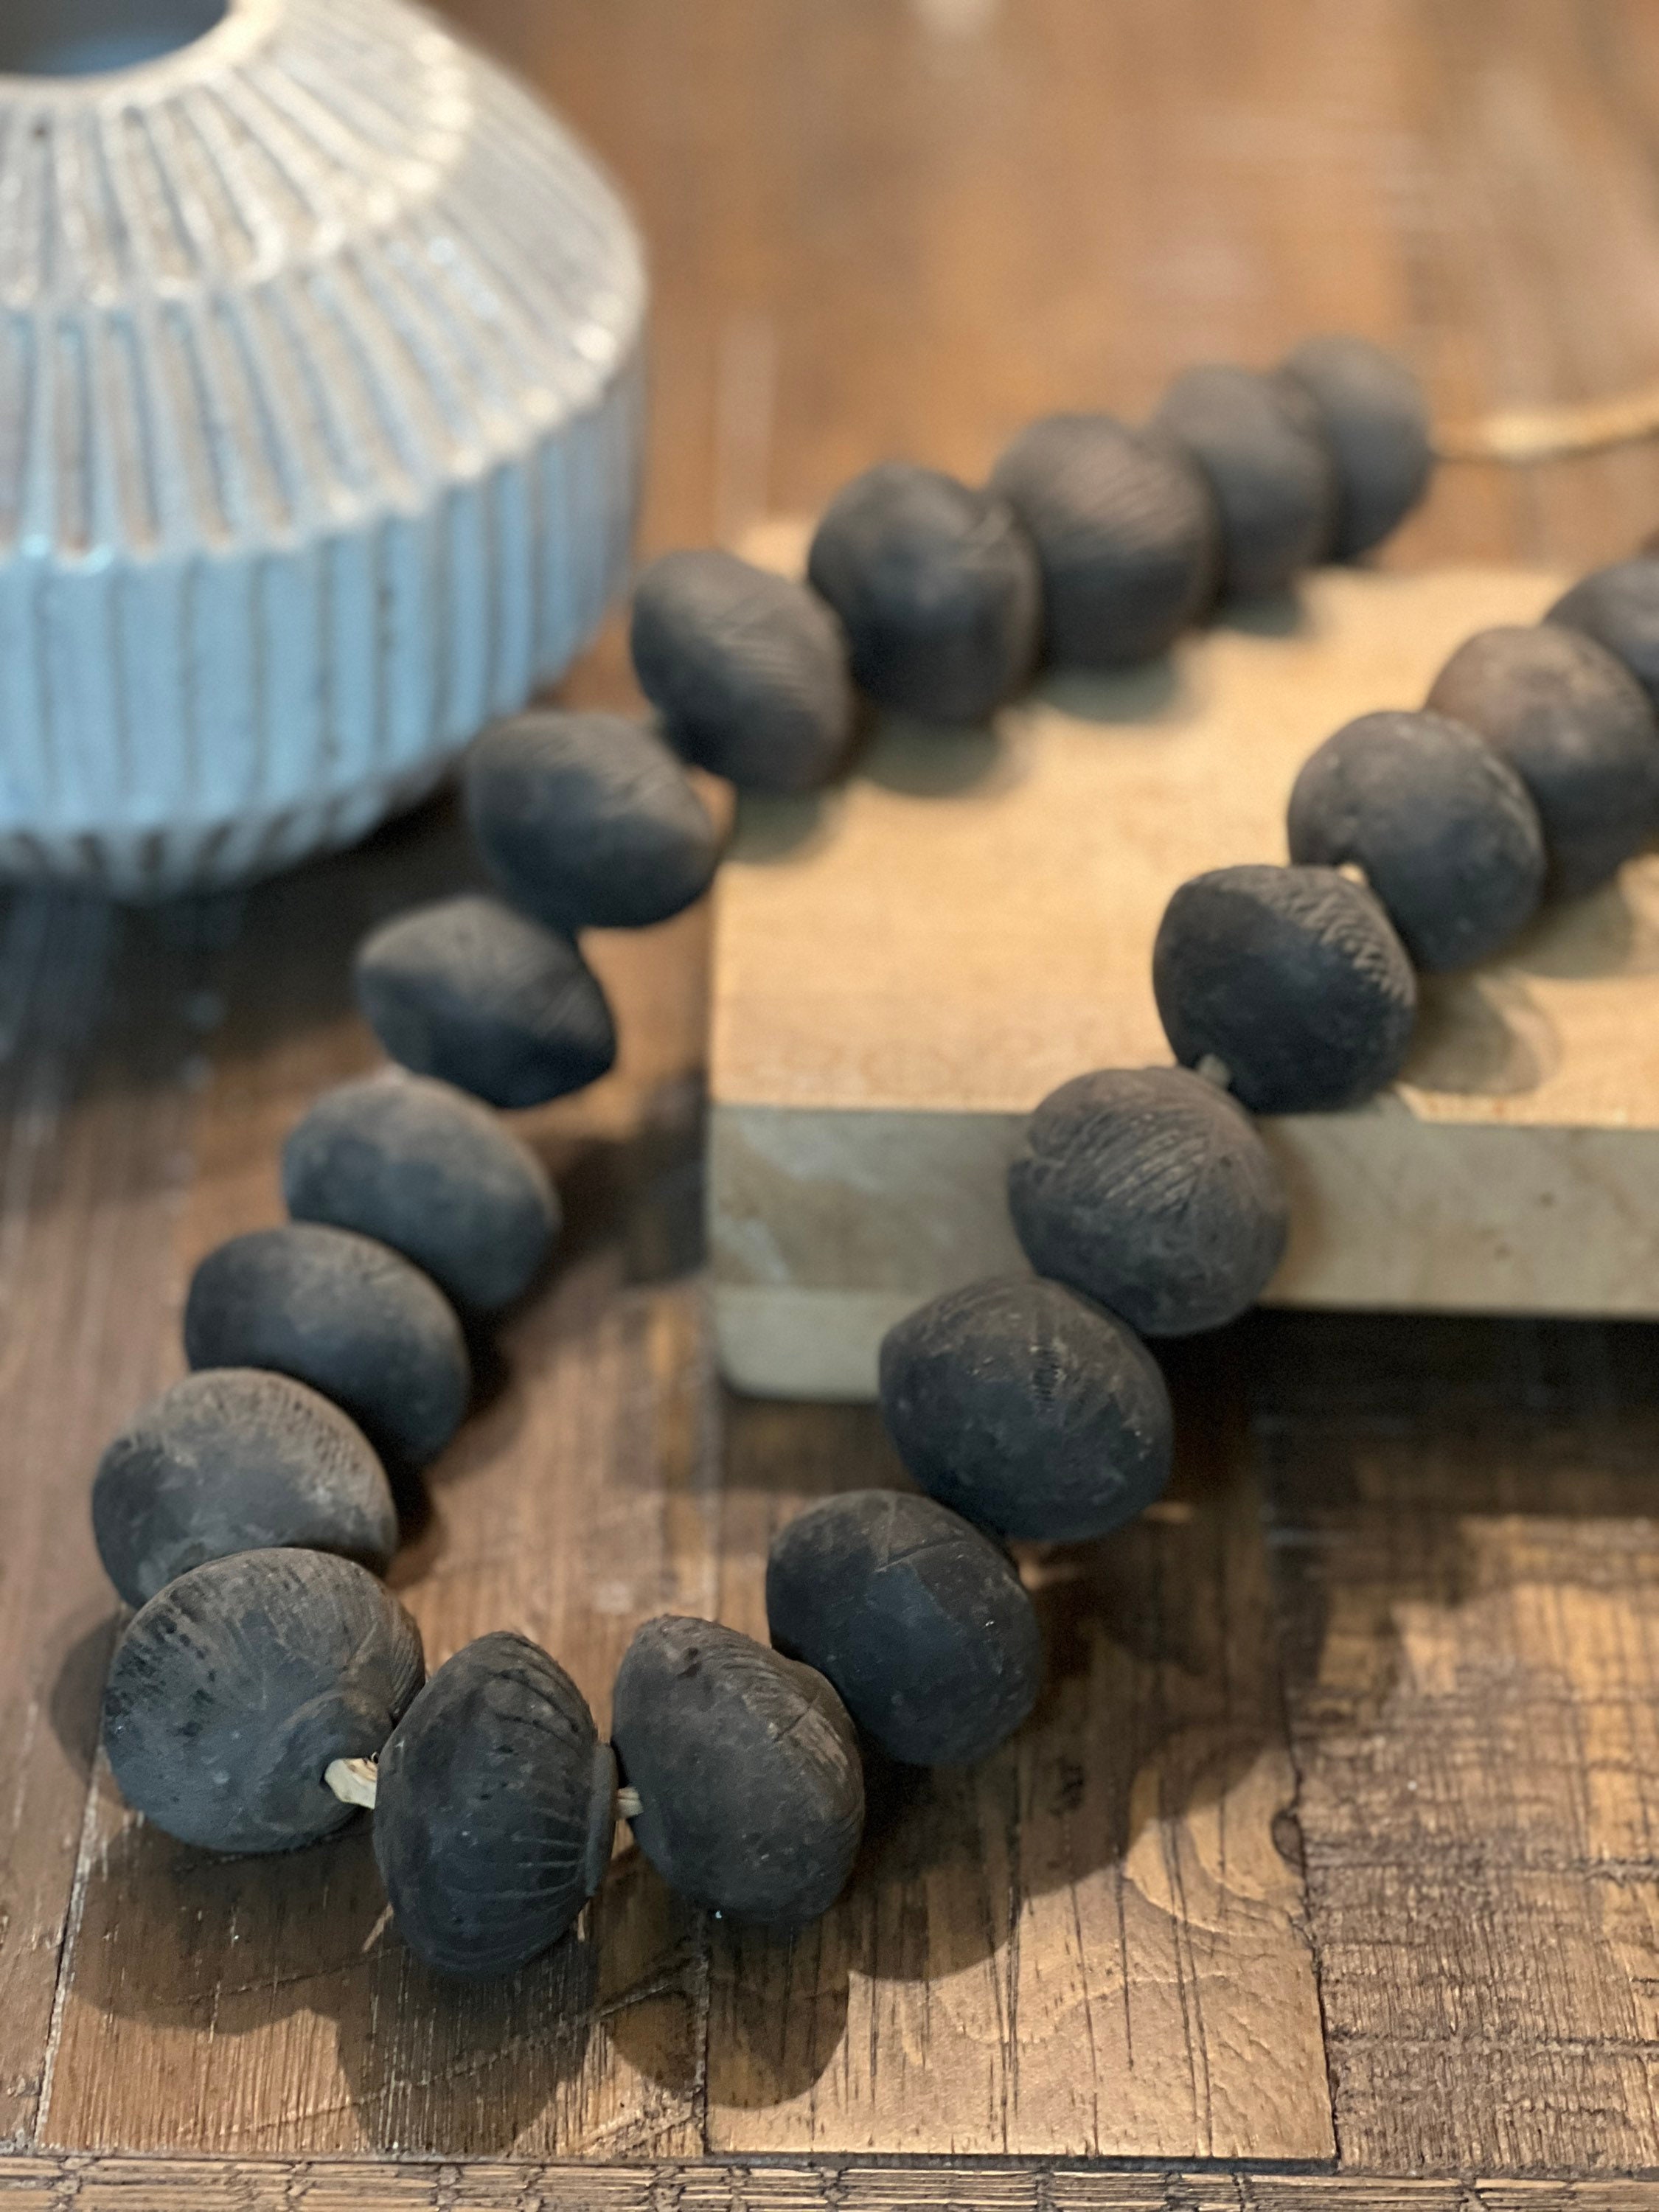 55 Black Terracotta Round Mali Clay Beads 12mm: Earthy African Mud Beads,  Coffee Table Beads, Authentic Handmade Home Decor 